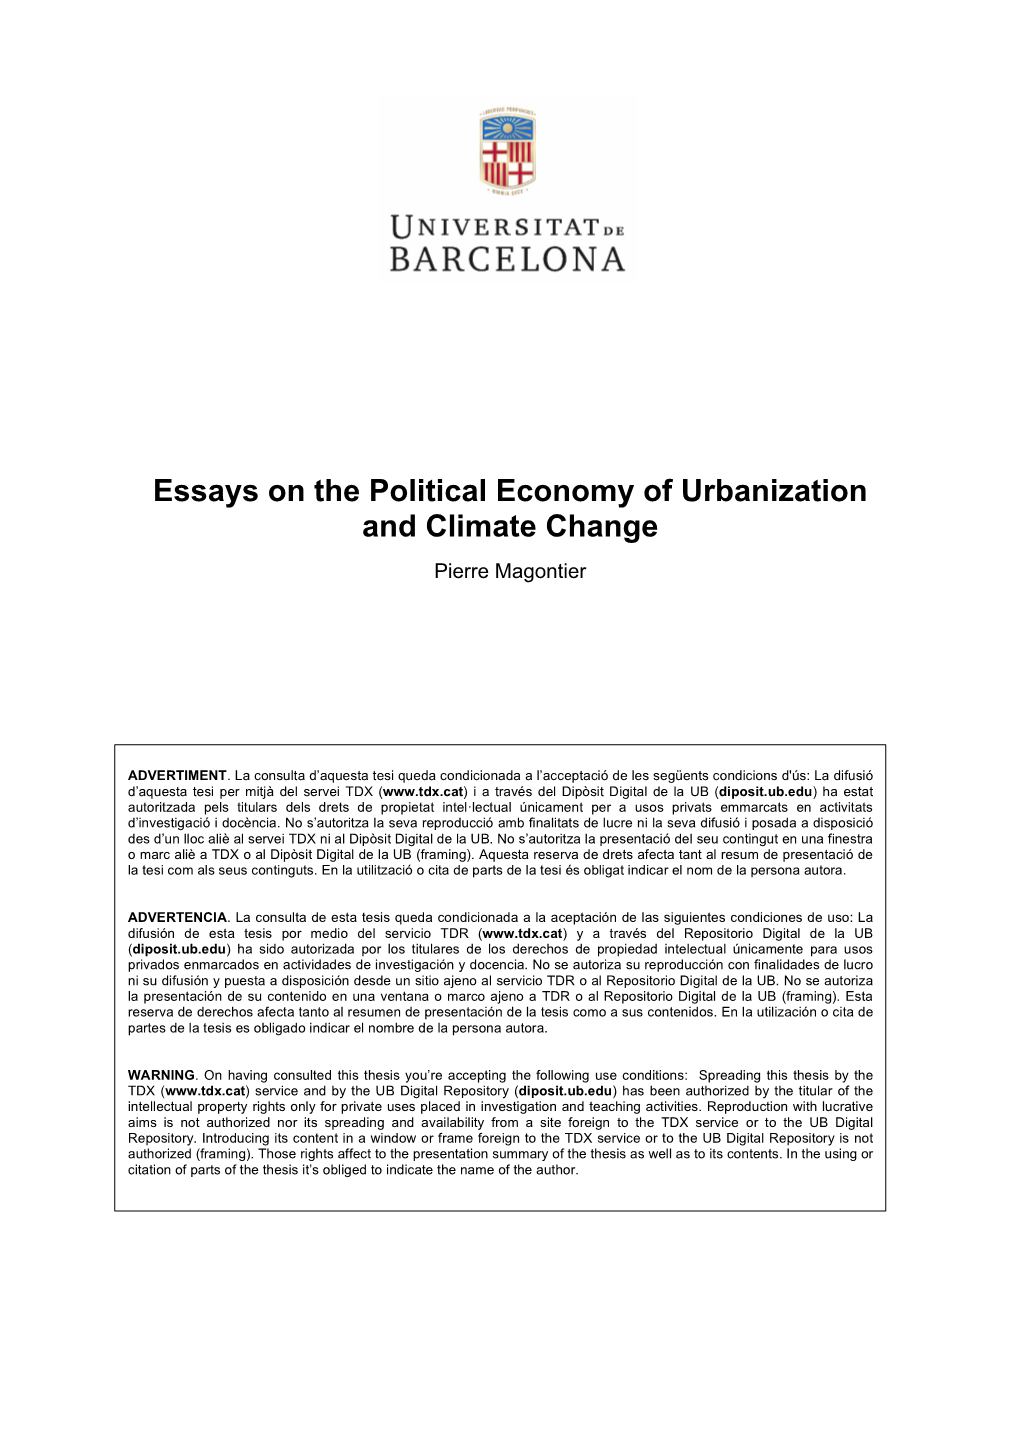 Essays on the Political Economy of Urbanization and Climate Change